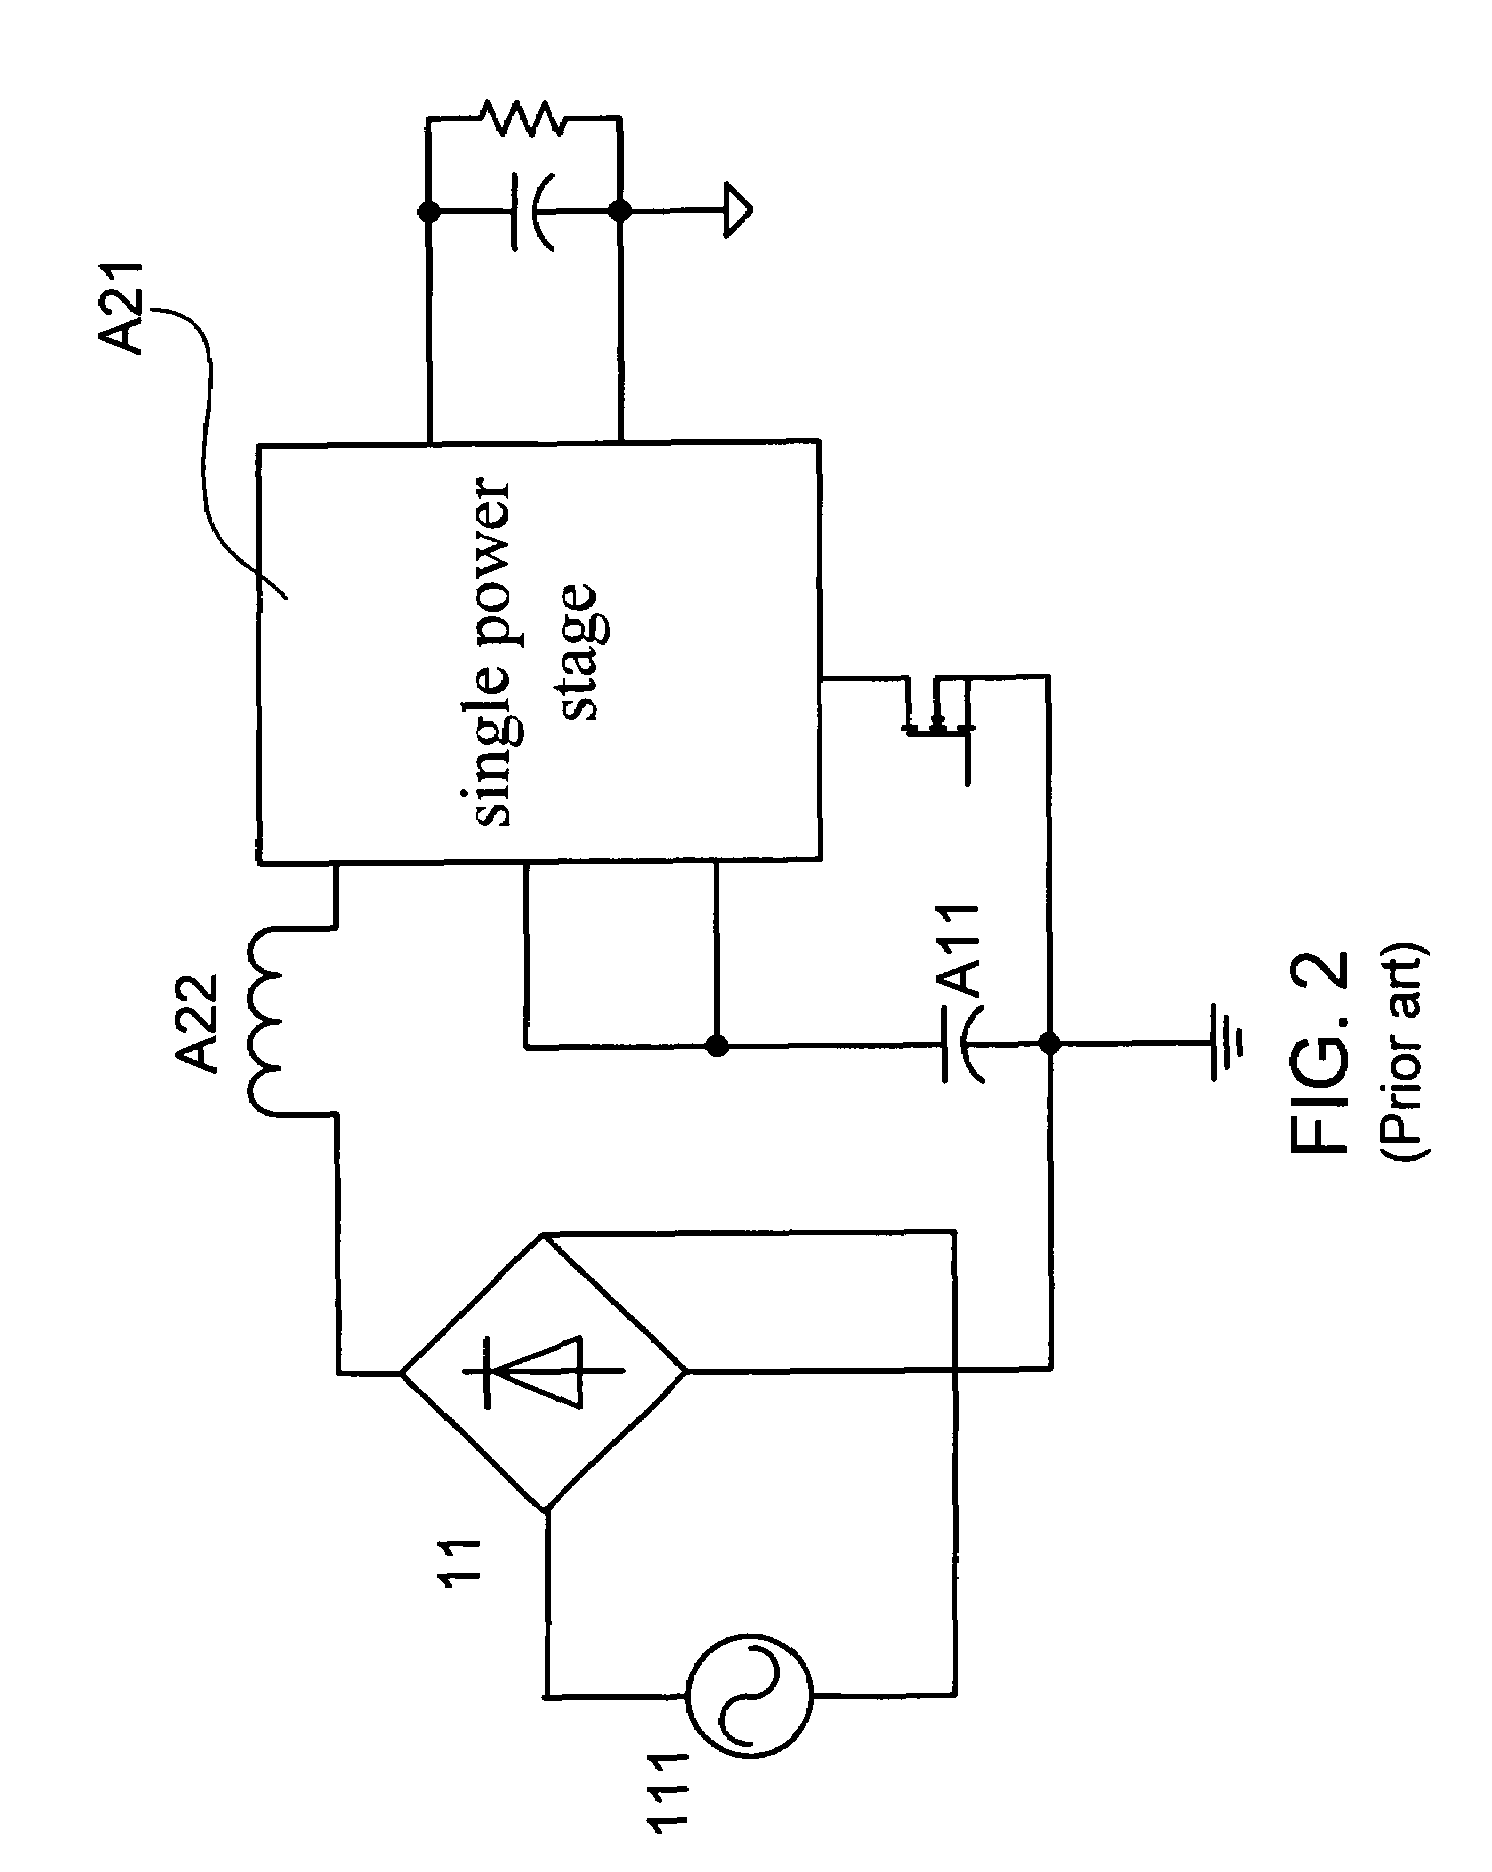 High power-factor AC/DC converter with parallel power processing